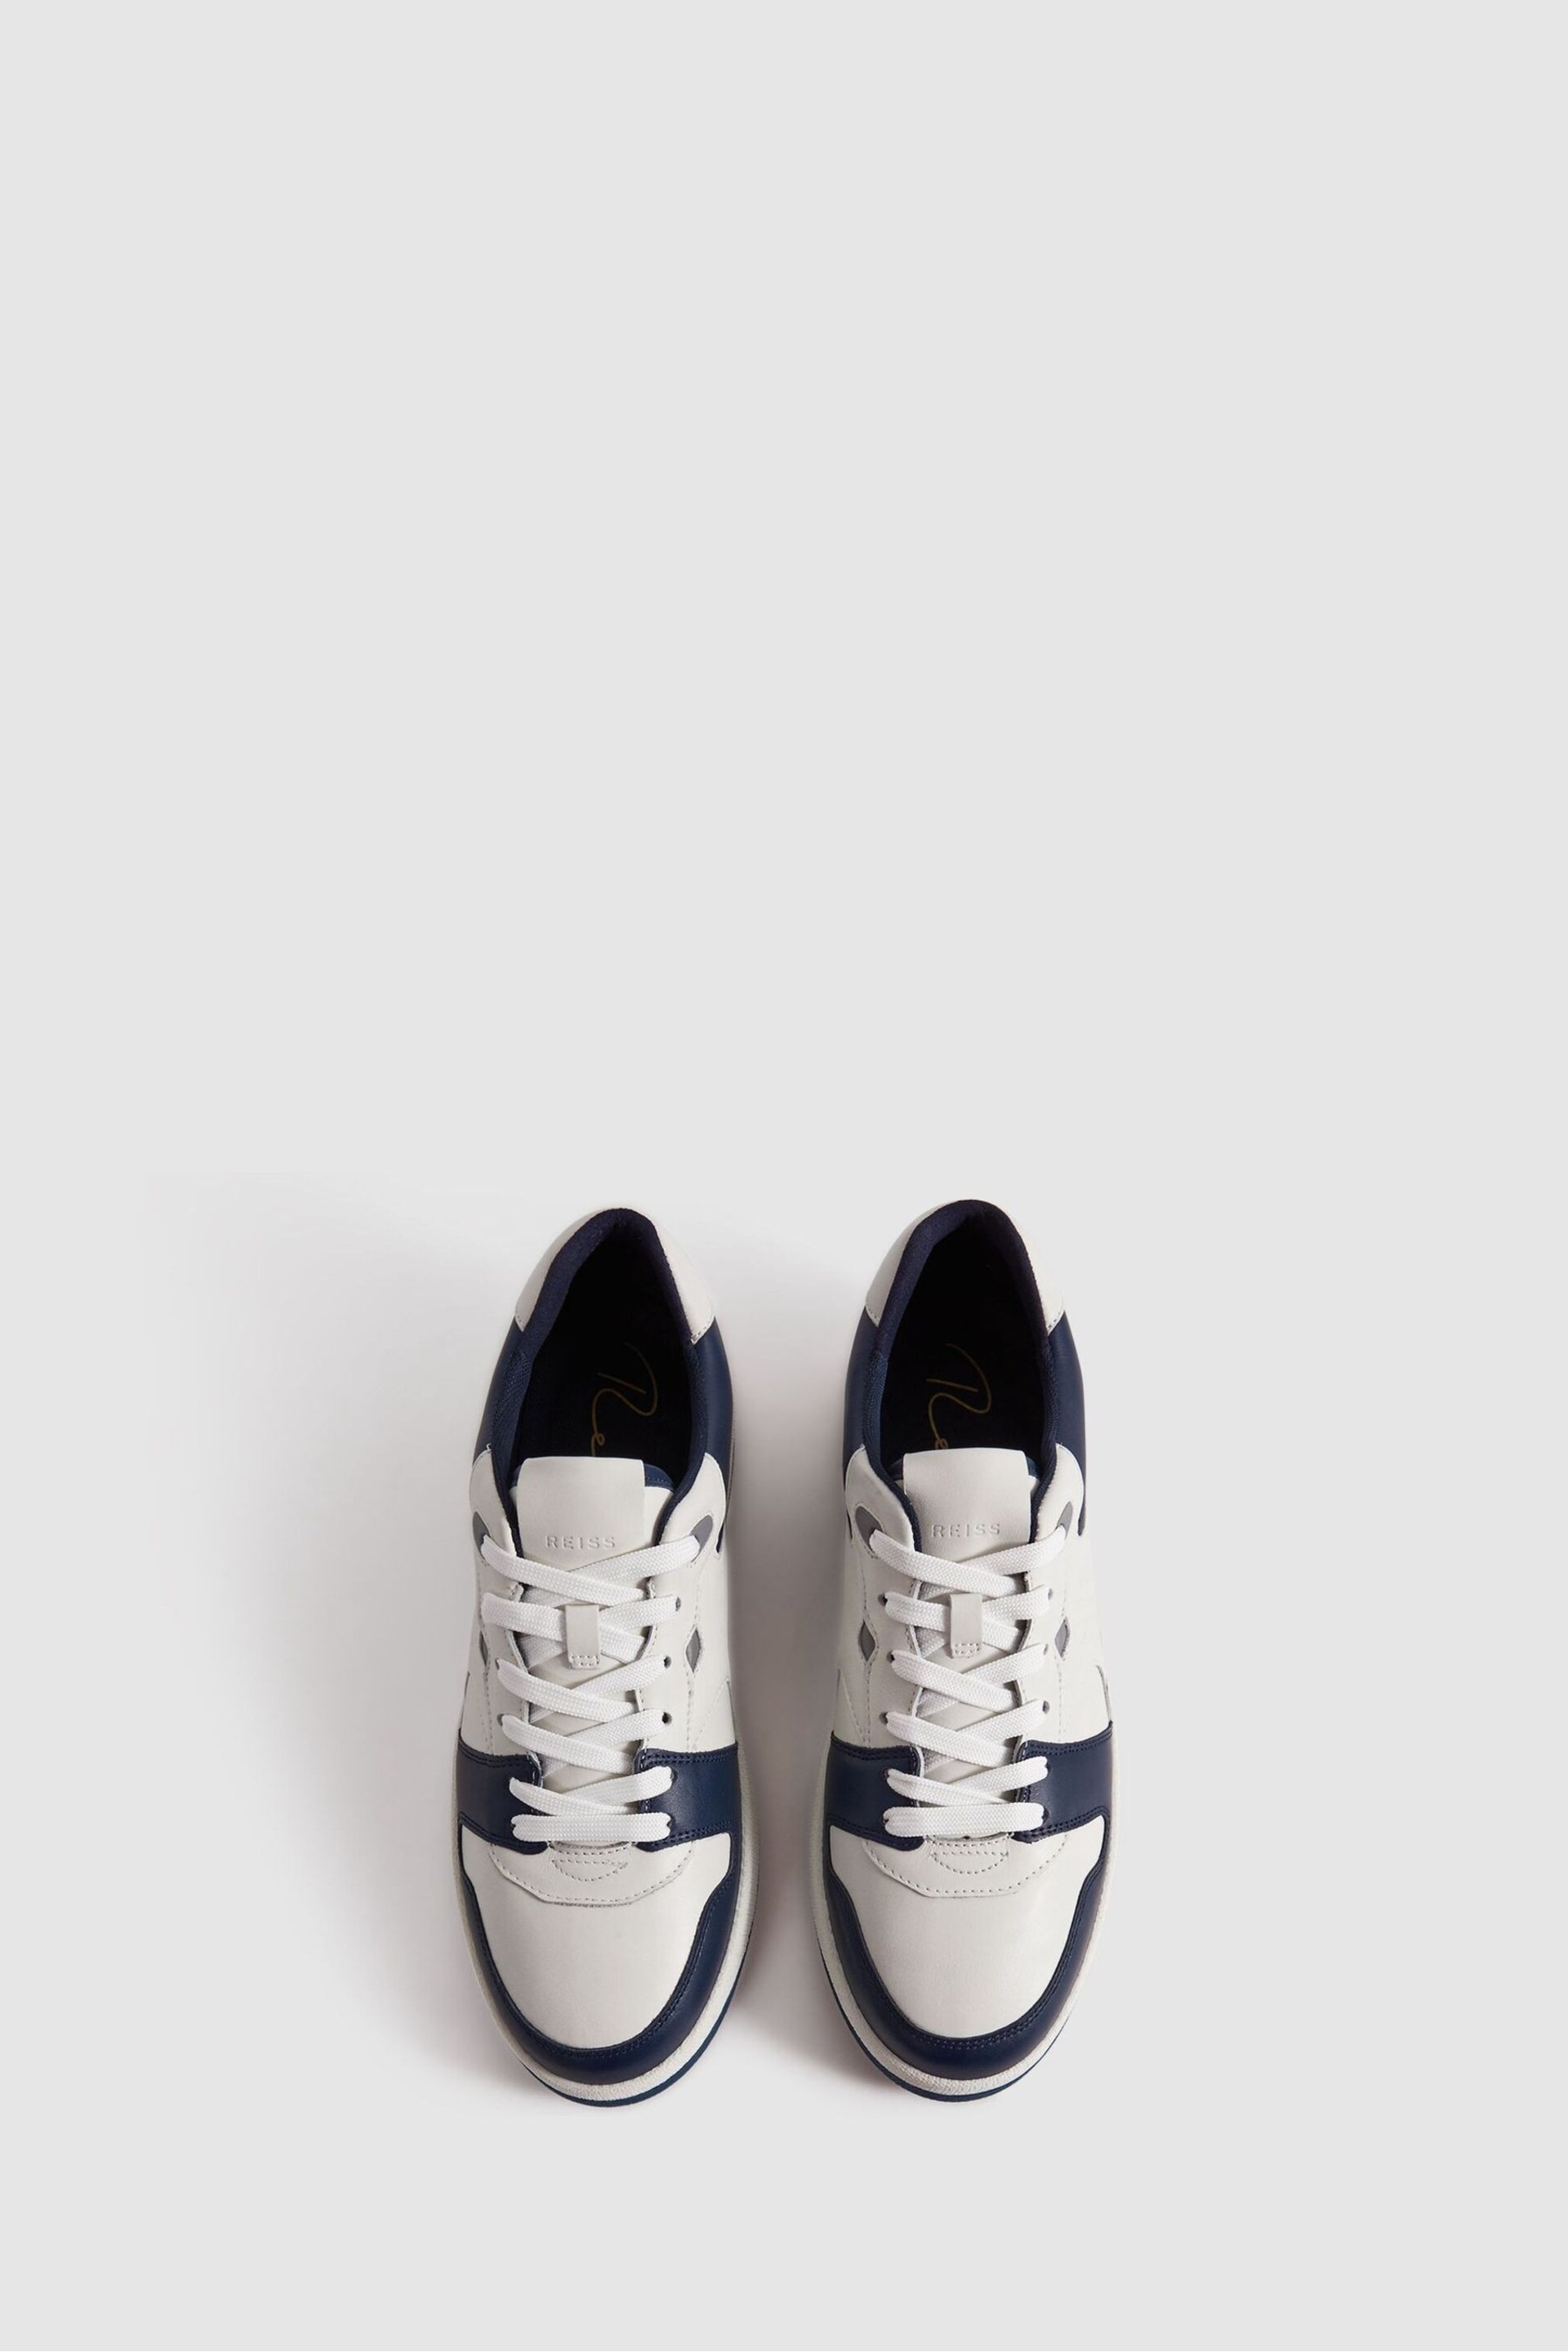 Reiss Navy/White Astor Leather Lace-Up Trainers - Image 3 of 5